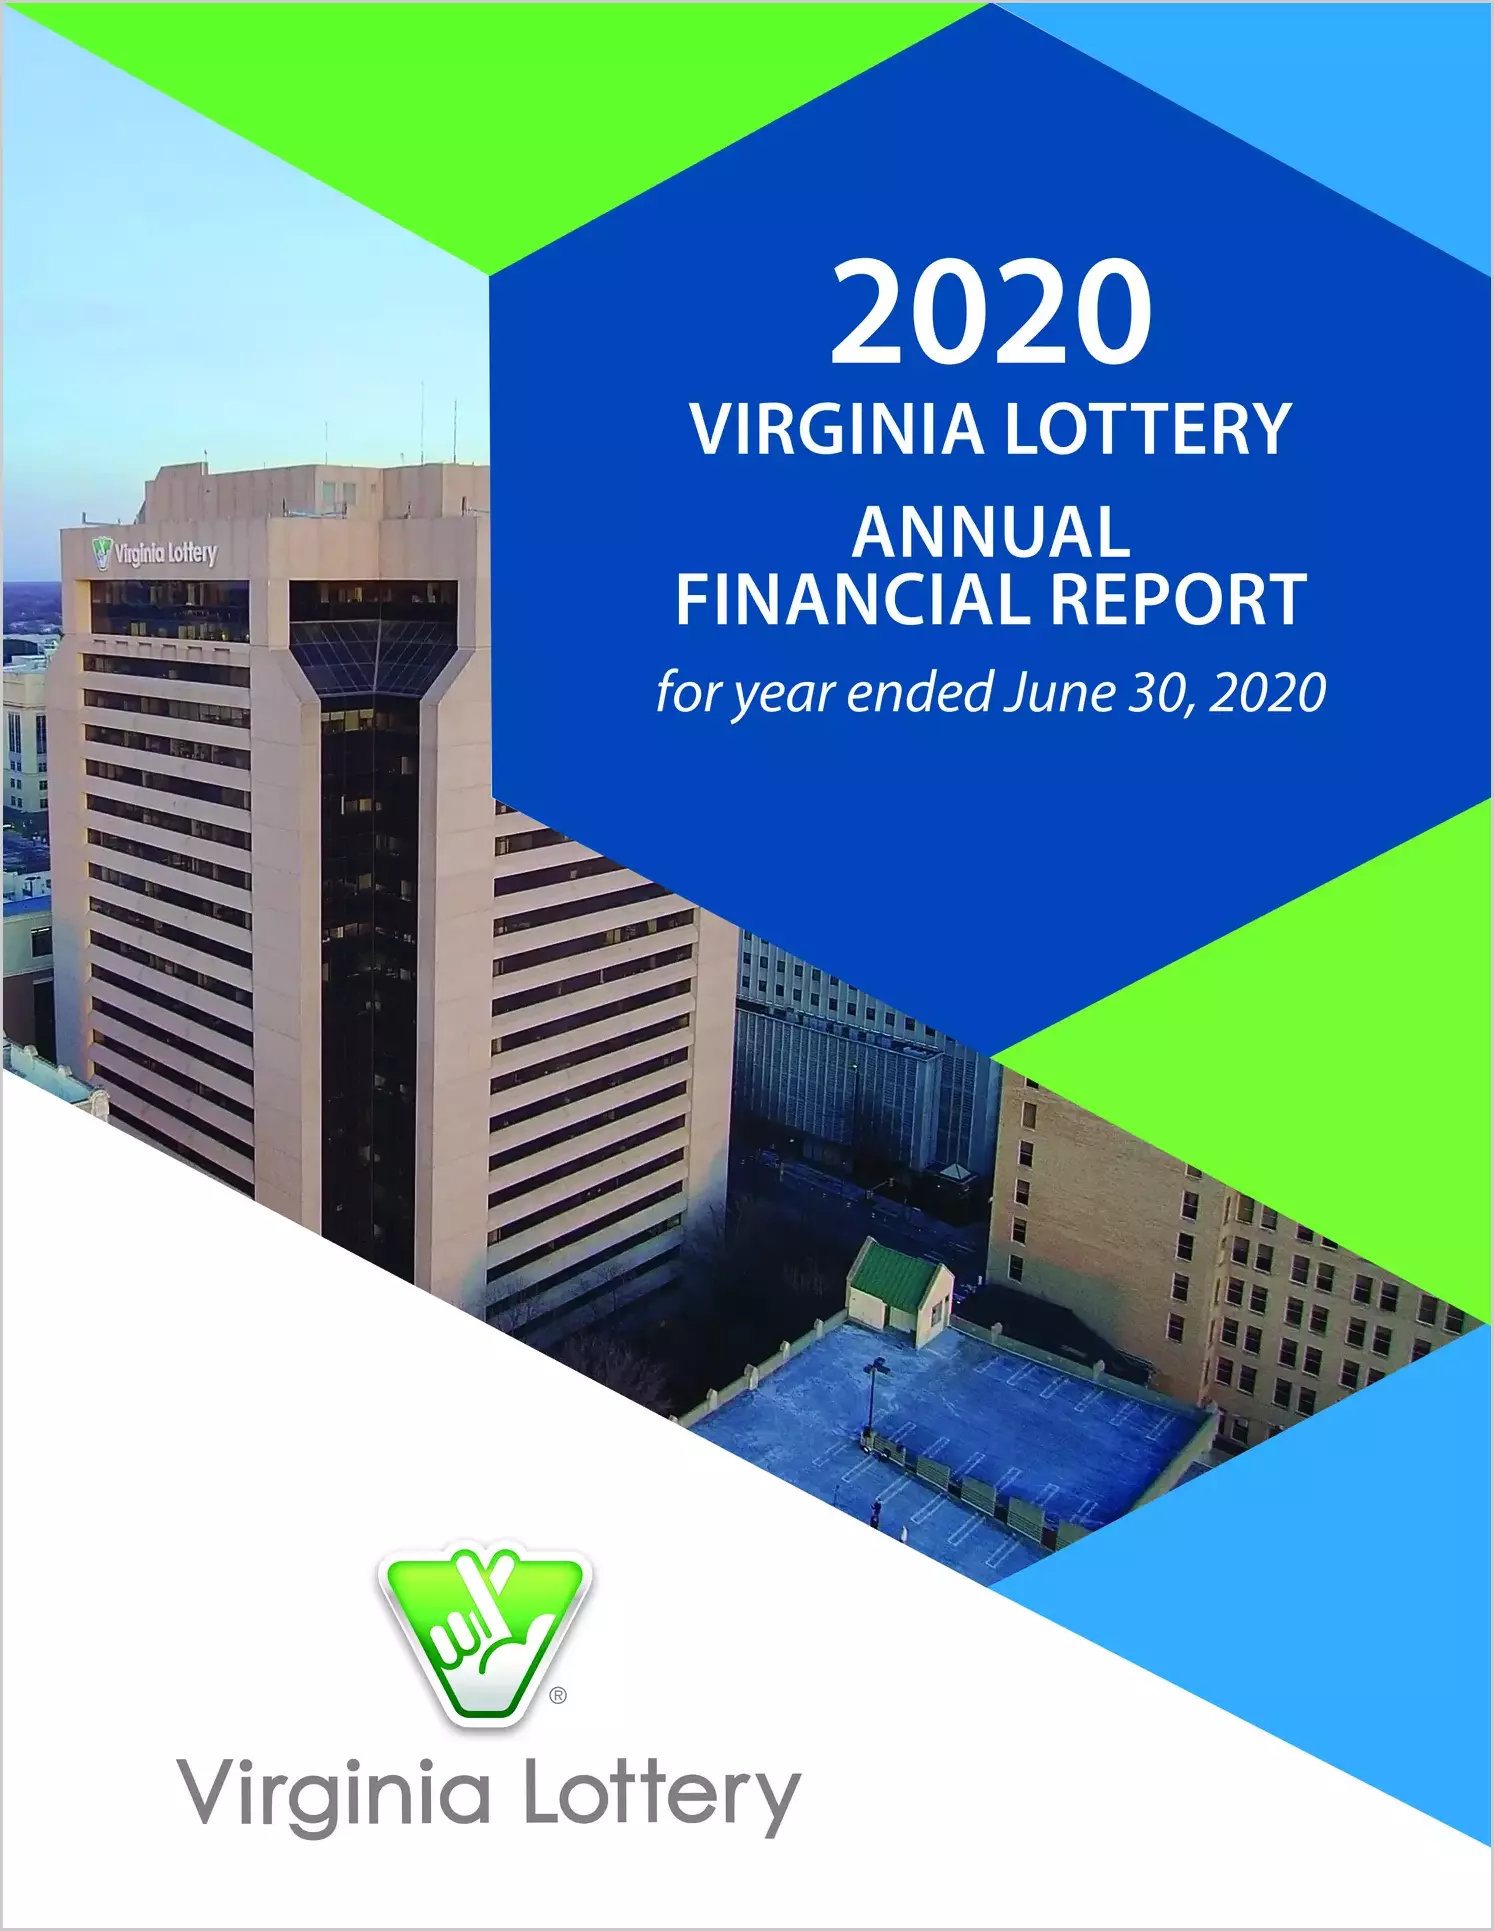 Virginia Lottery Financial Statements for the year ended June 30, 2020